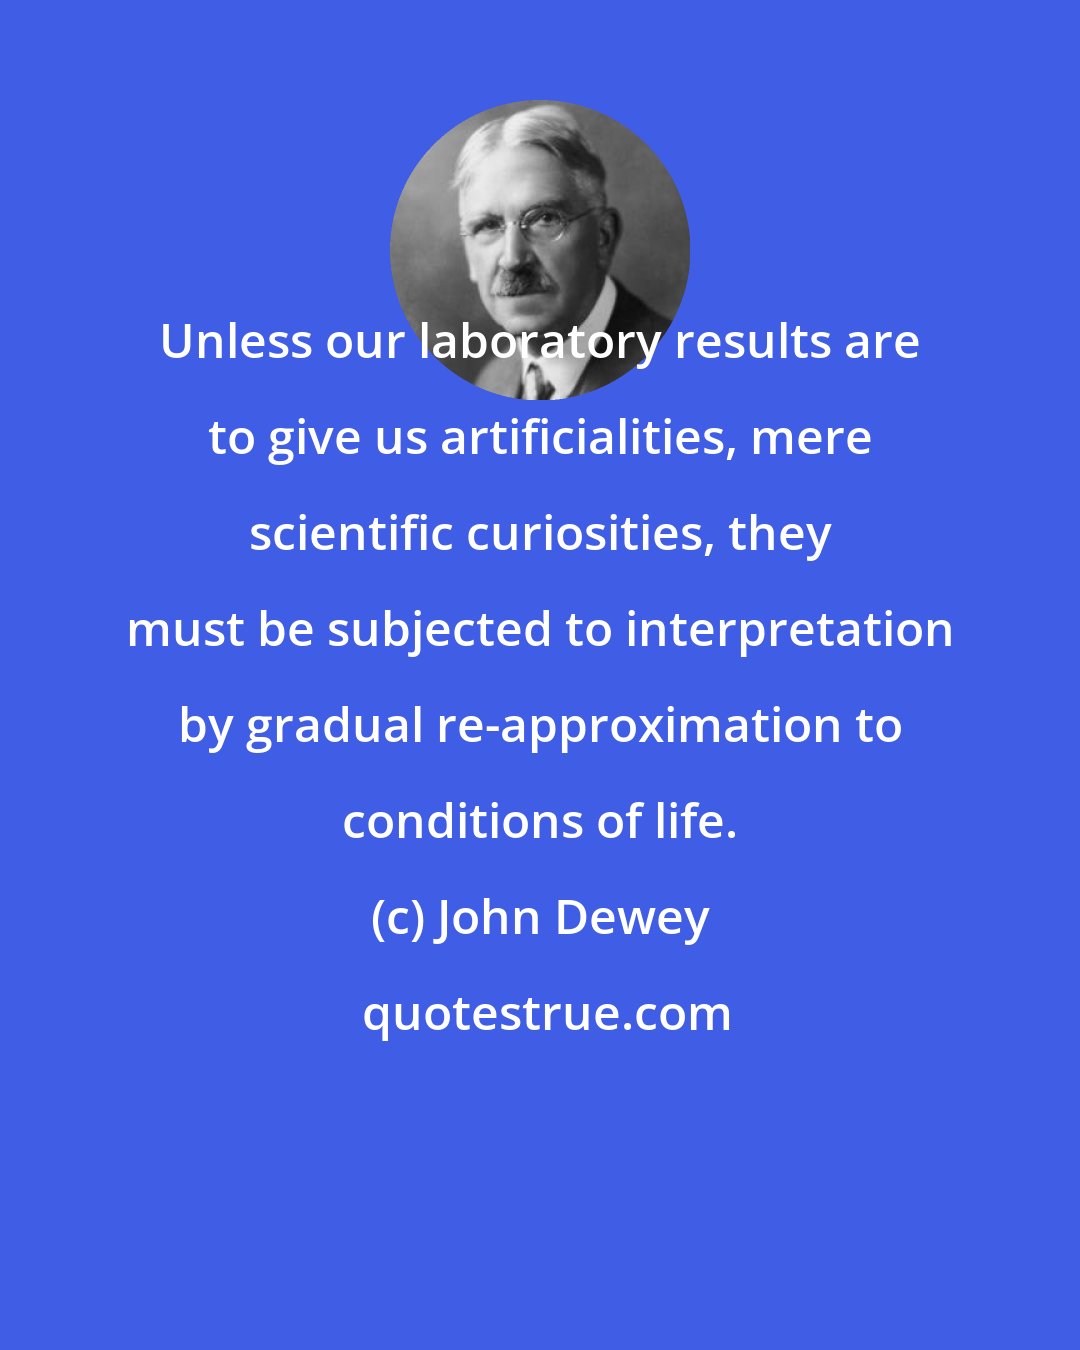 John Dewey: Unless our laboratory results are to give us artificialities, mere scientific curiosities, they must be subjected to interpretation by gradual re-approximation to conditions of life.